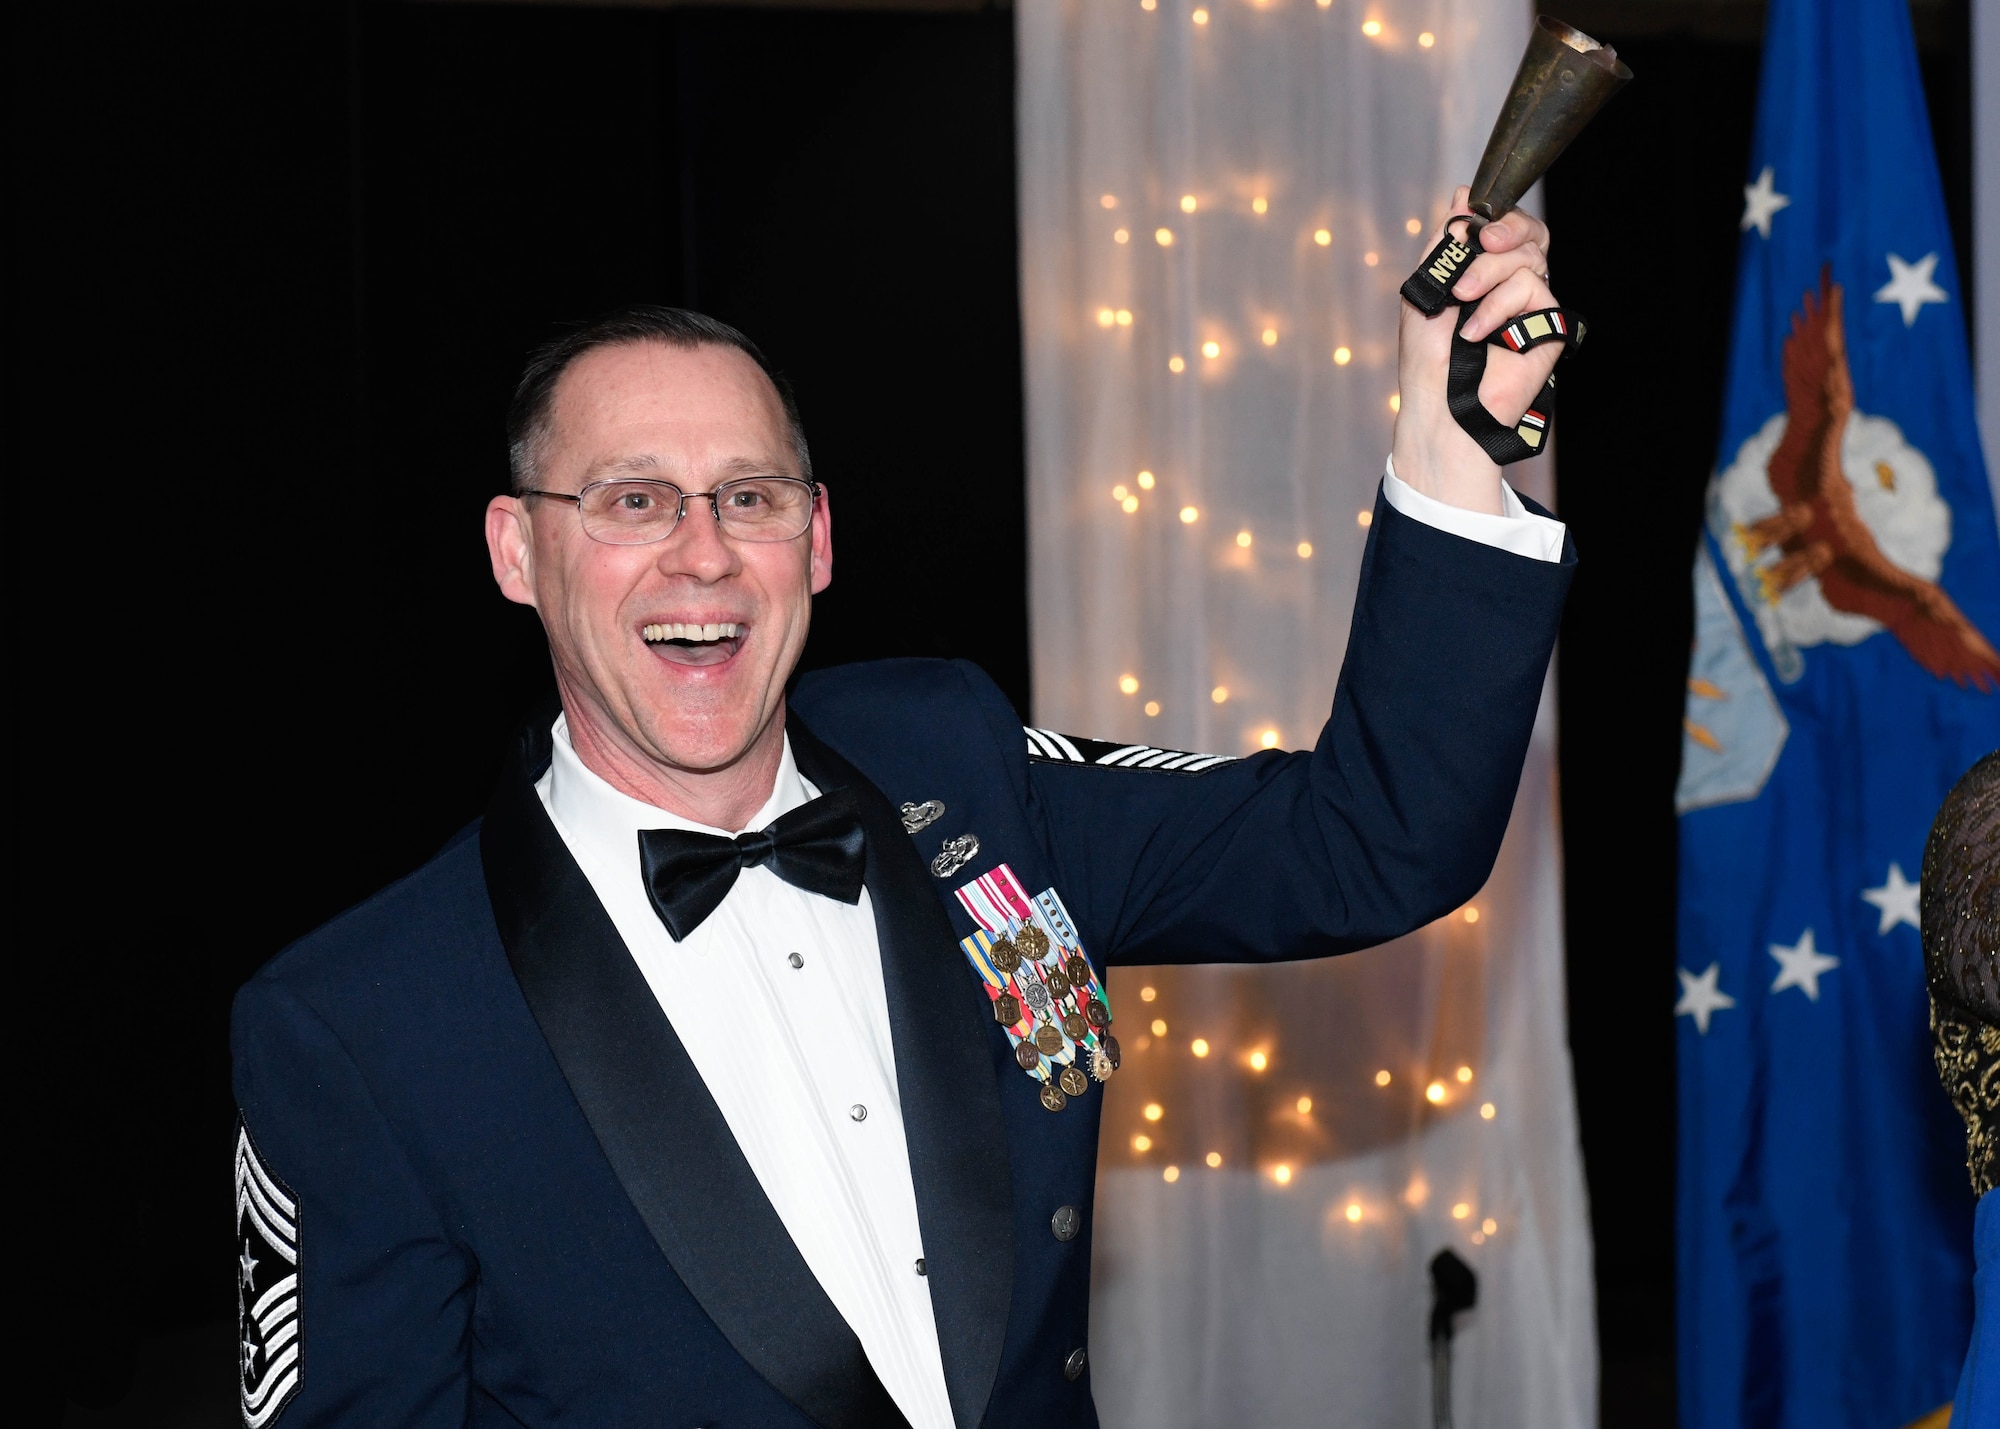 The Airman of the Year award program is designed to recognize Airmen who display superior leadership, job performance and personal achievement.